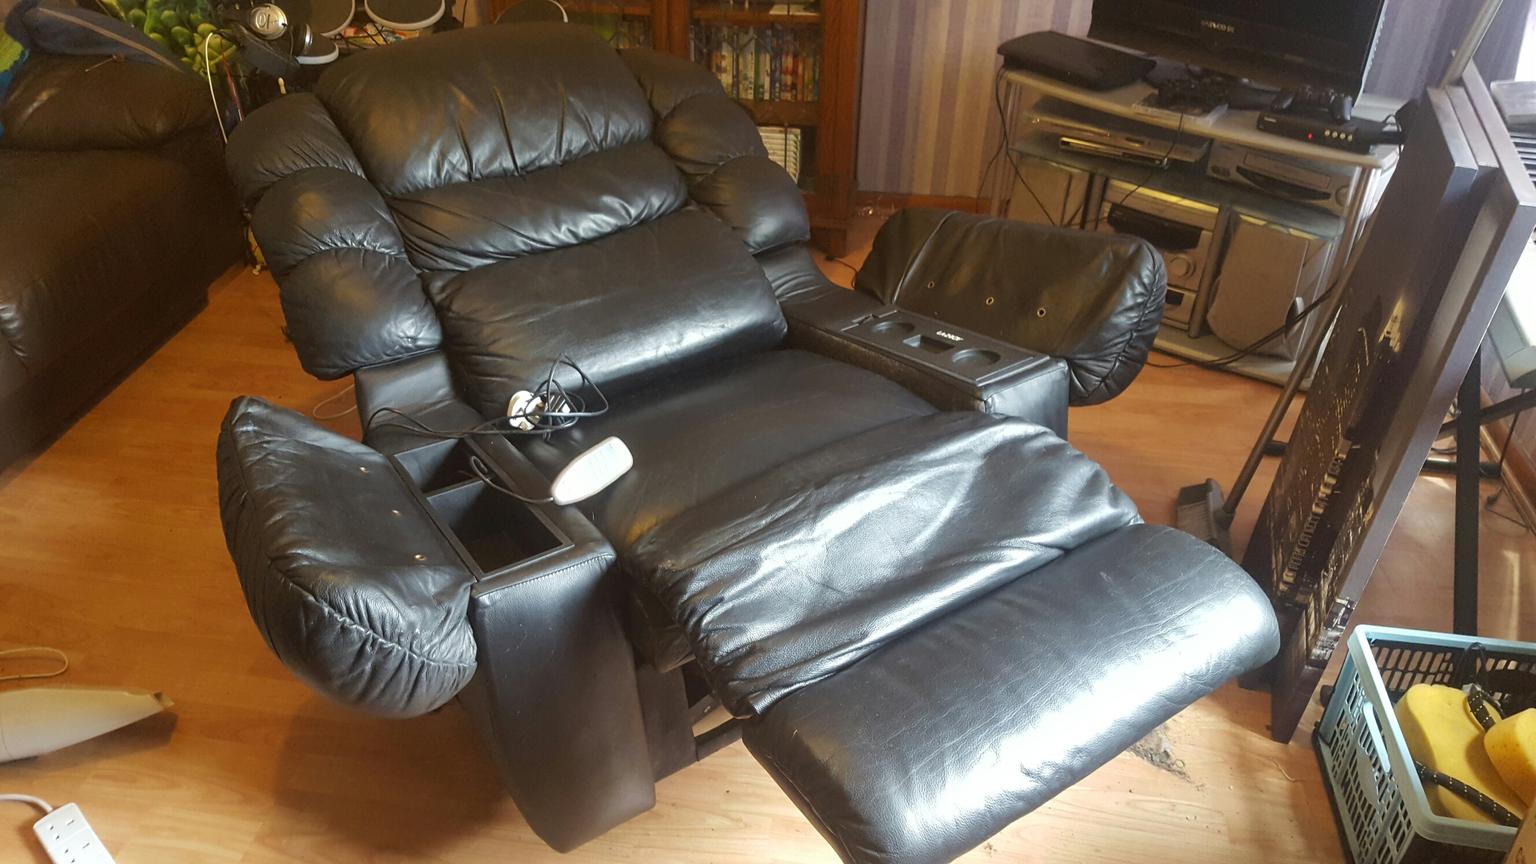 Lazyboy Joey Recliner In Pr26 Ribble For 350 00 For Sale Shpock